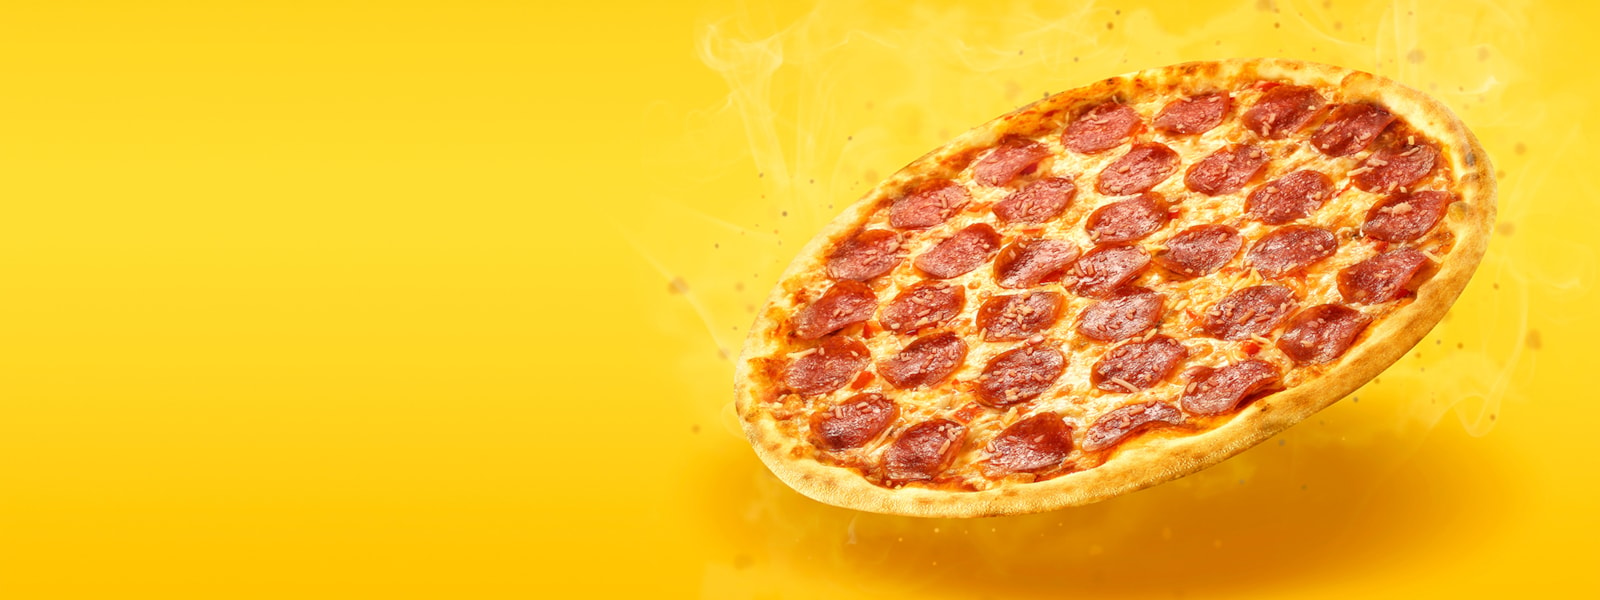 Pizza on yellow back ground